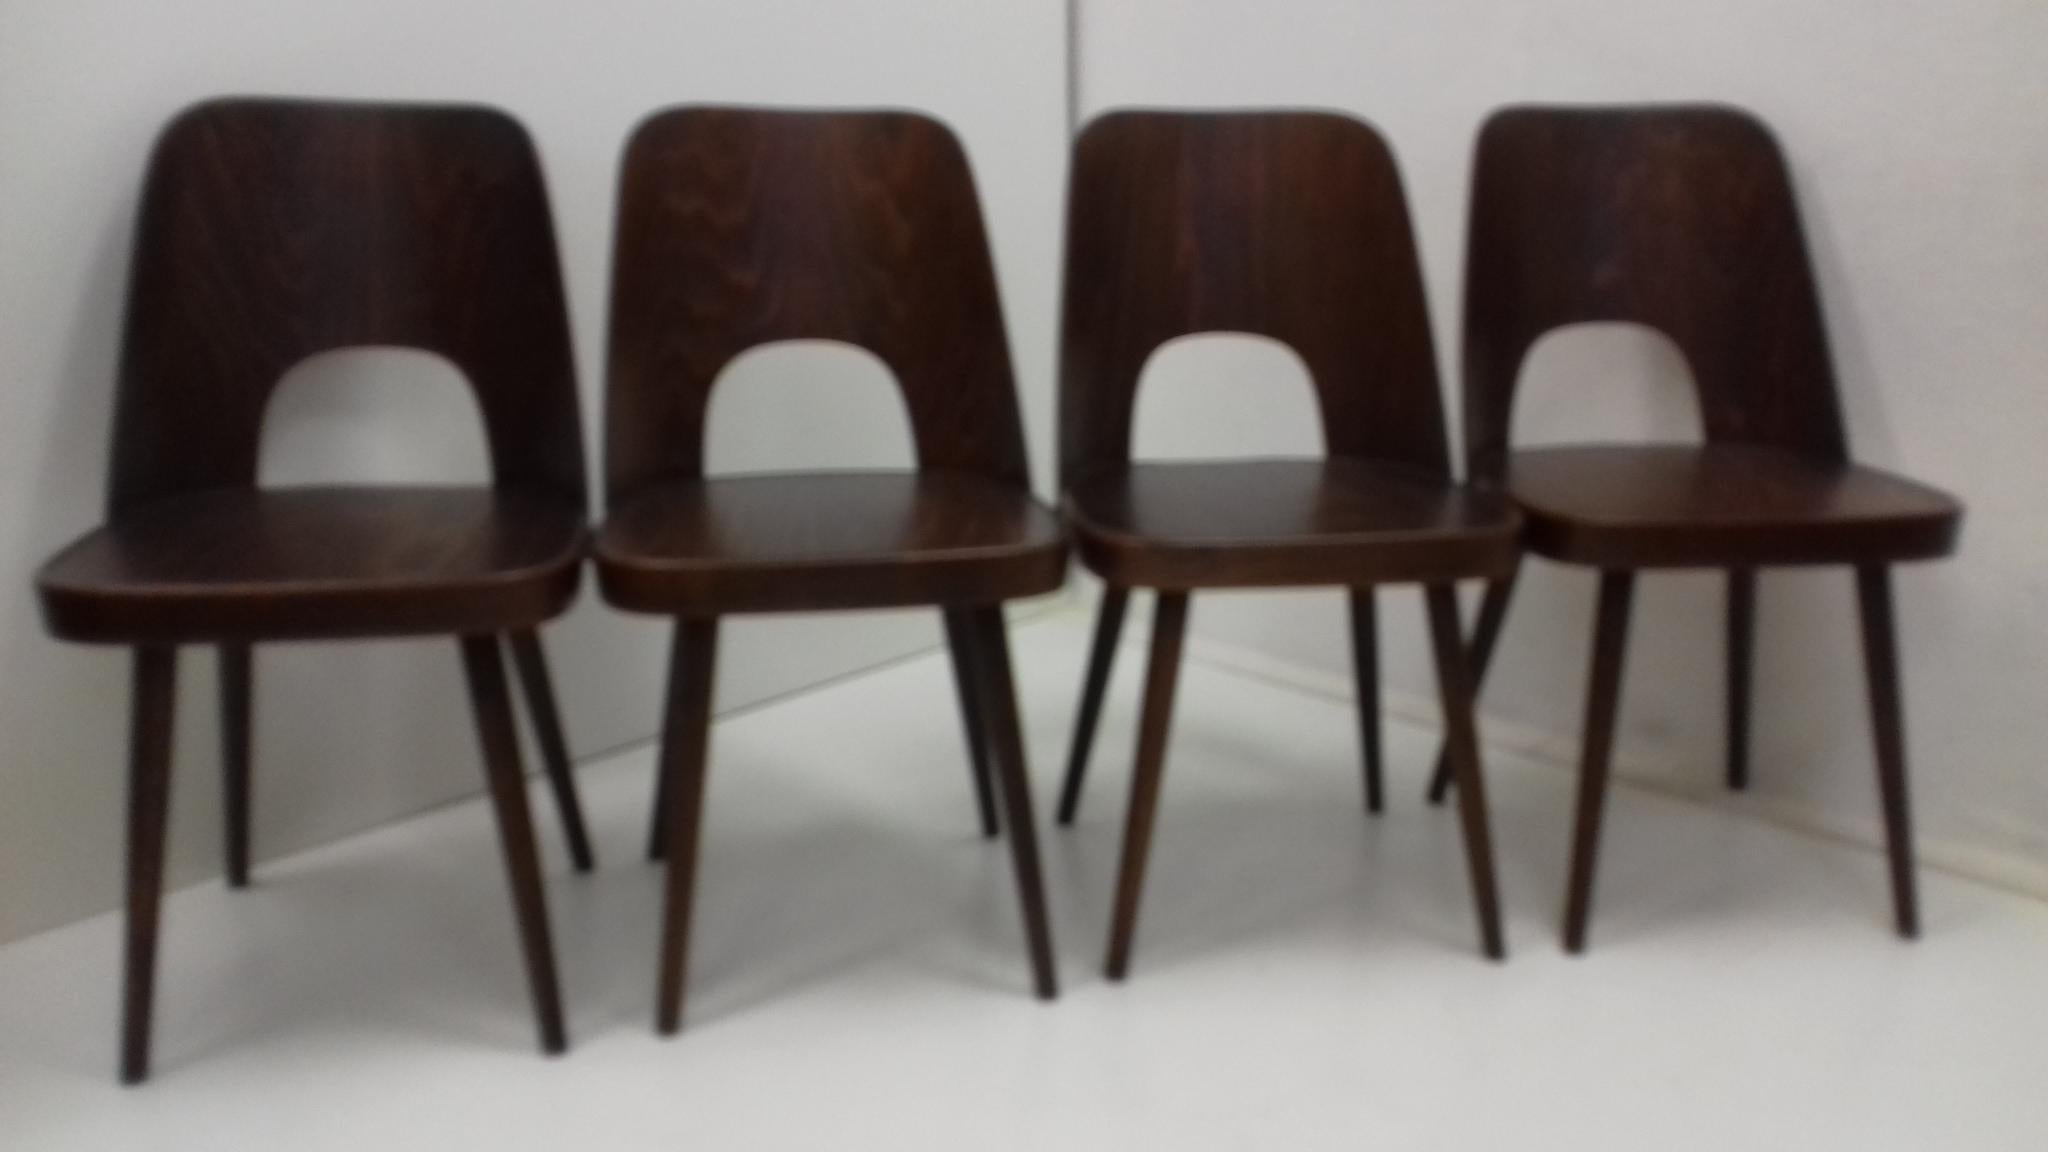 Czech Set of Four Wooden Chairs Designed by Oswald Haerdtl, 1950s For Sale